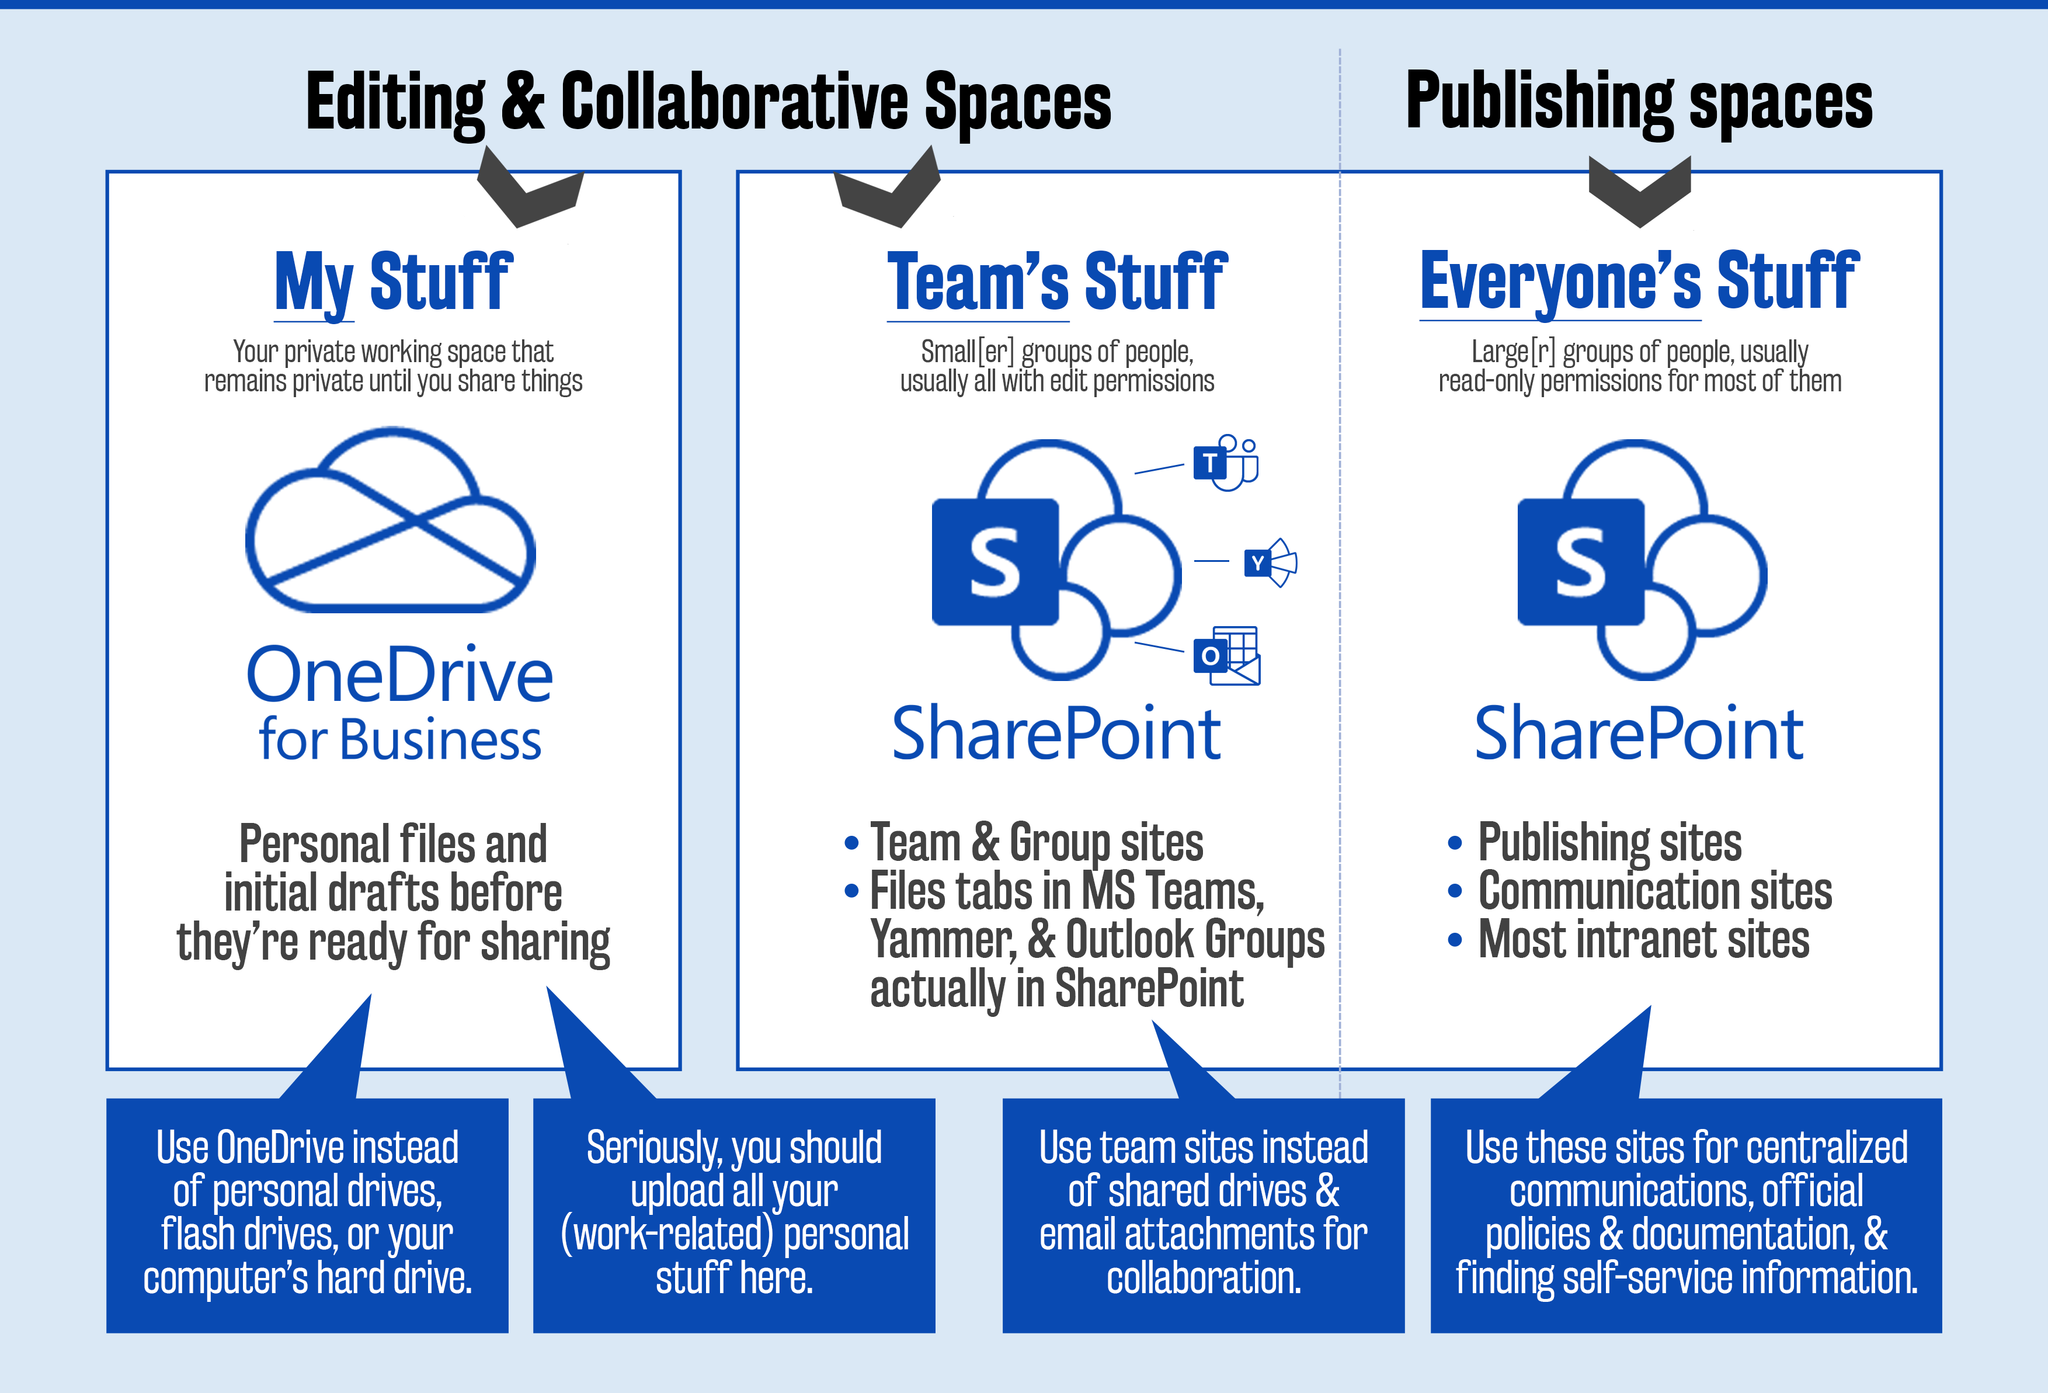 Does Onedrive Use Sharepoint?